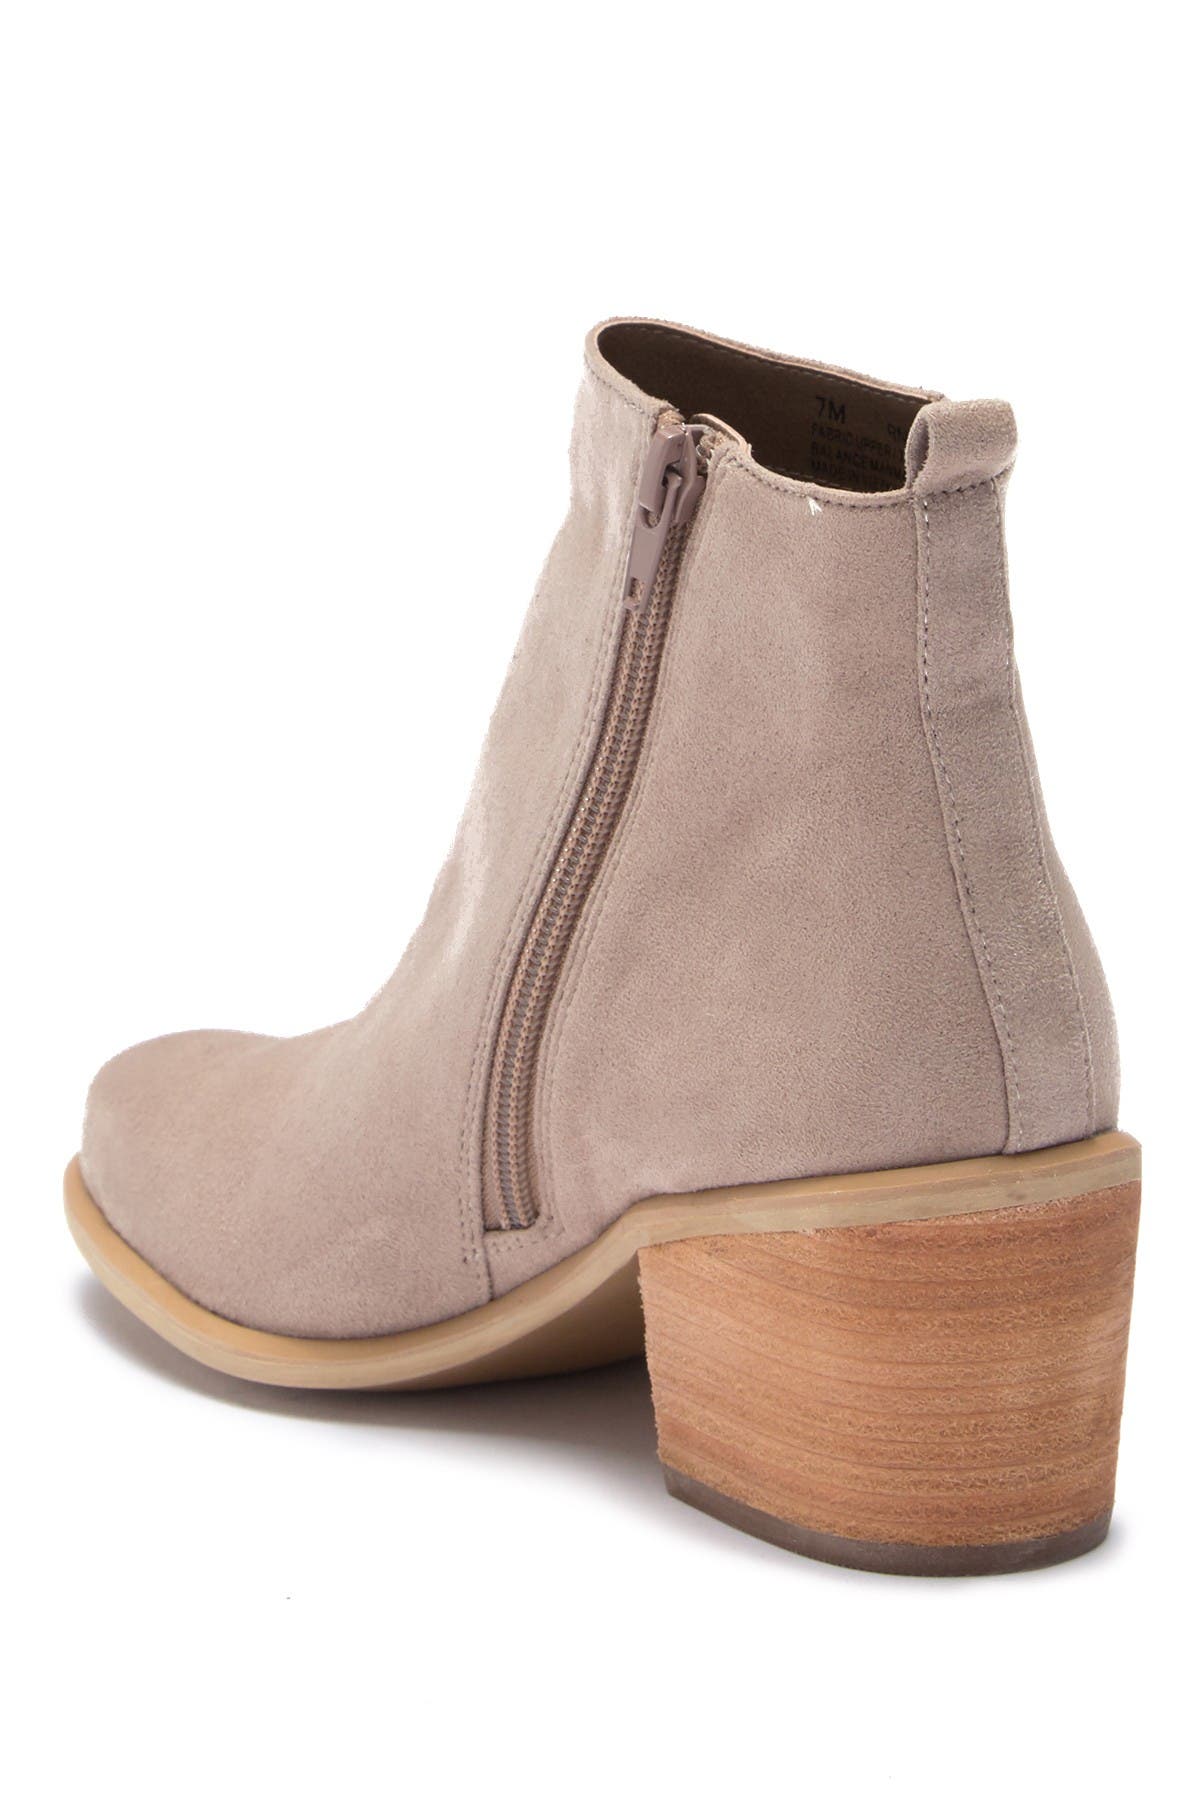 Abound | Evee Fab Ankle Bootie 